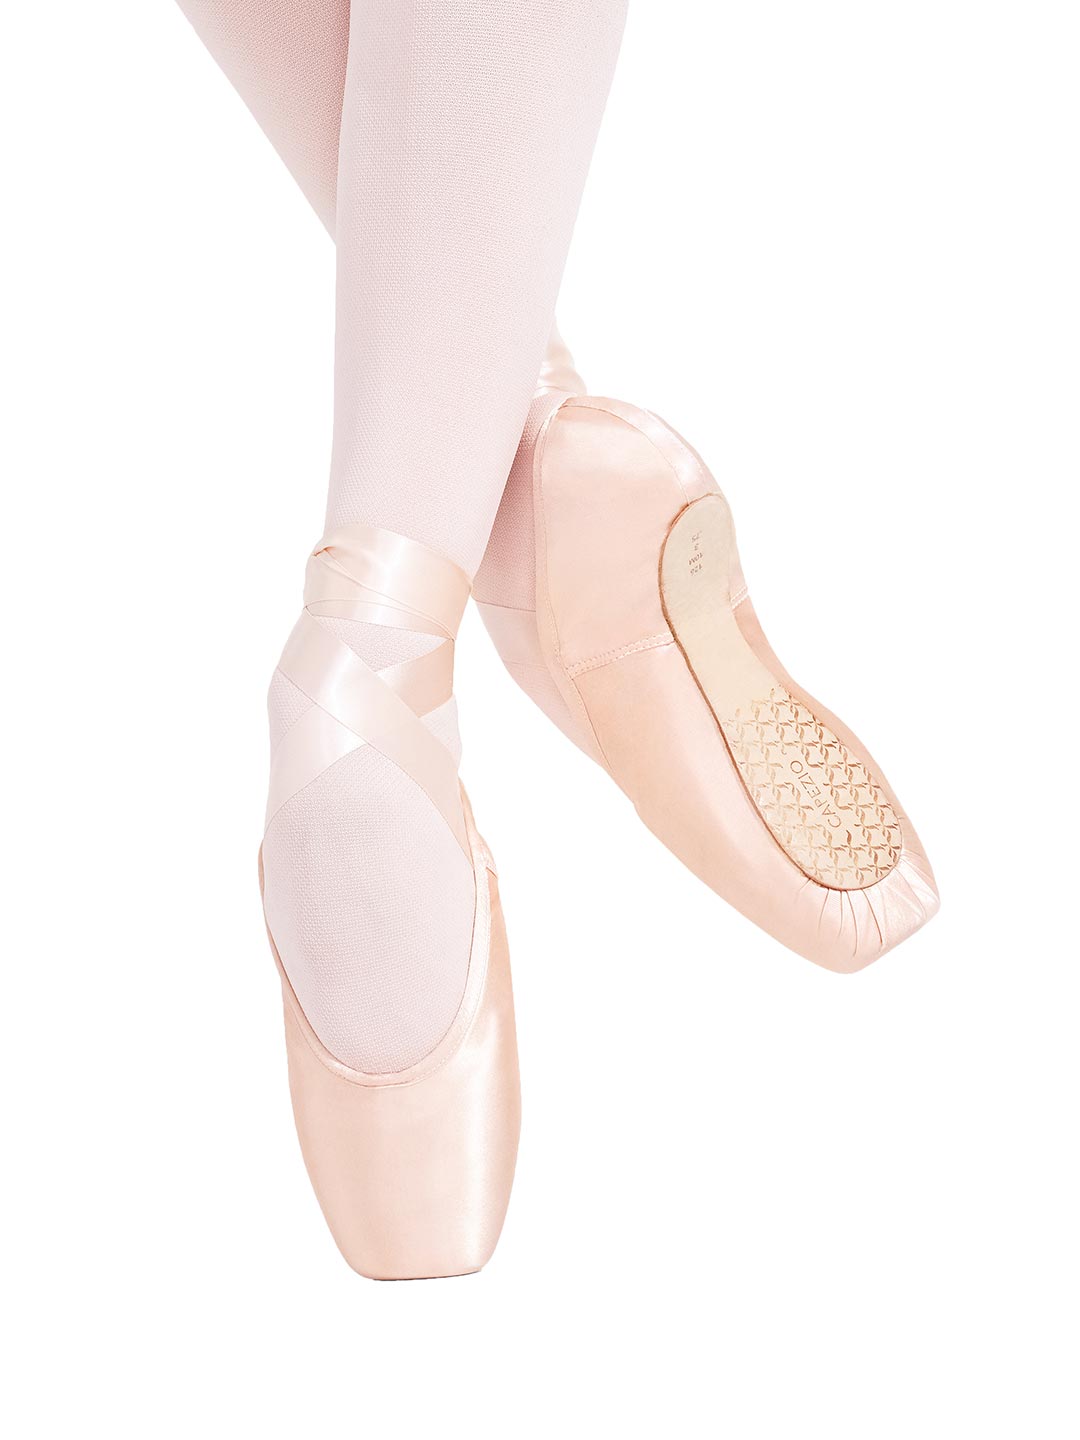 tiffany pointe shoes